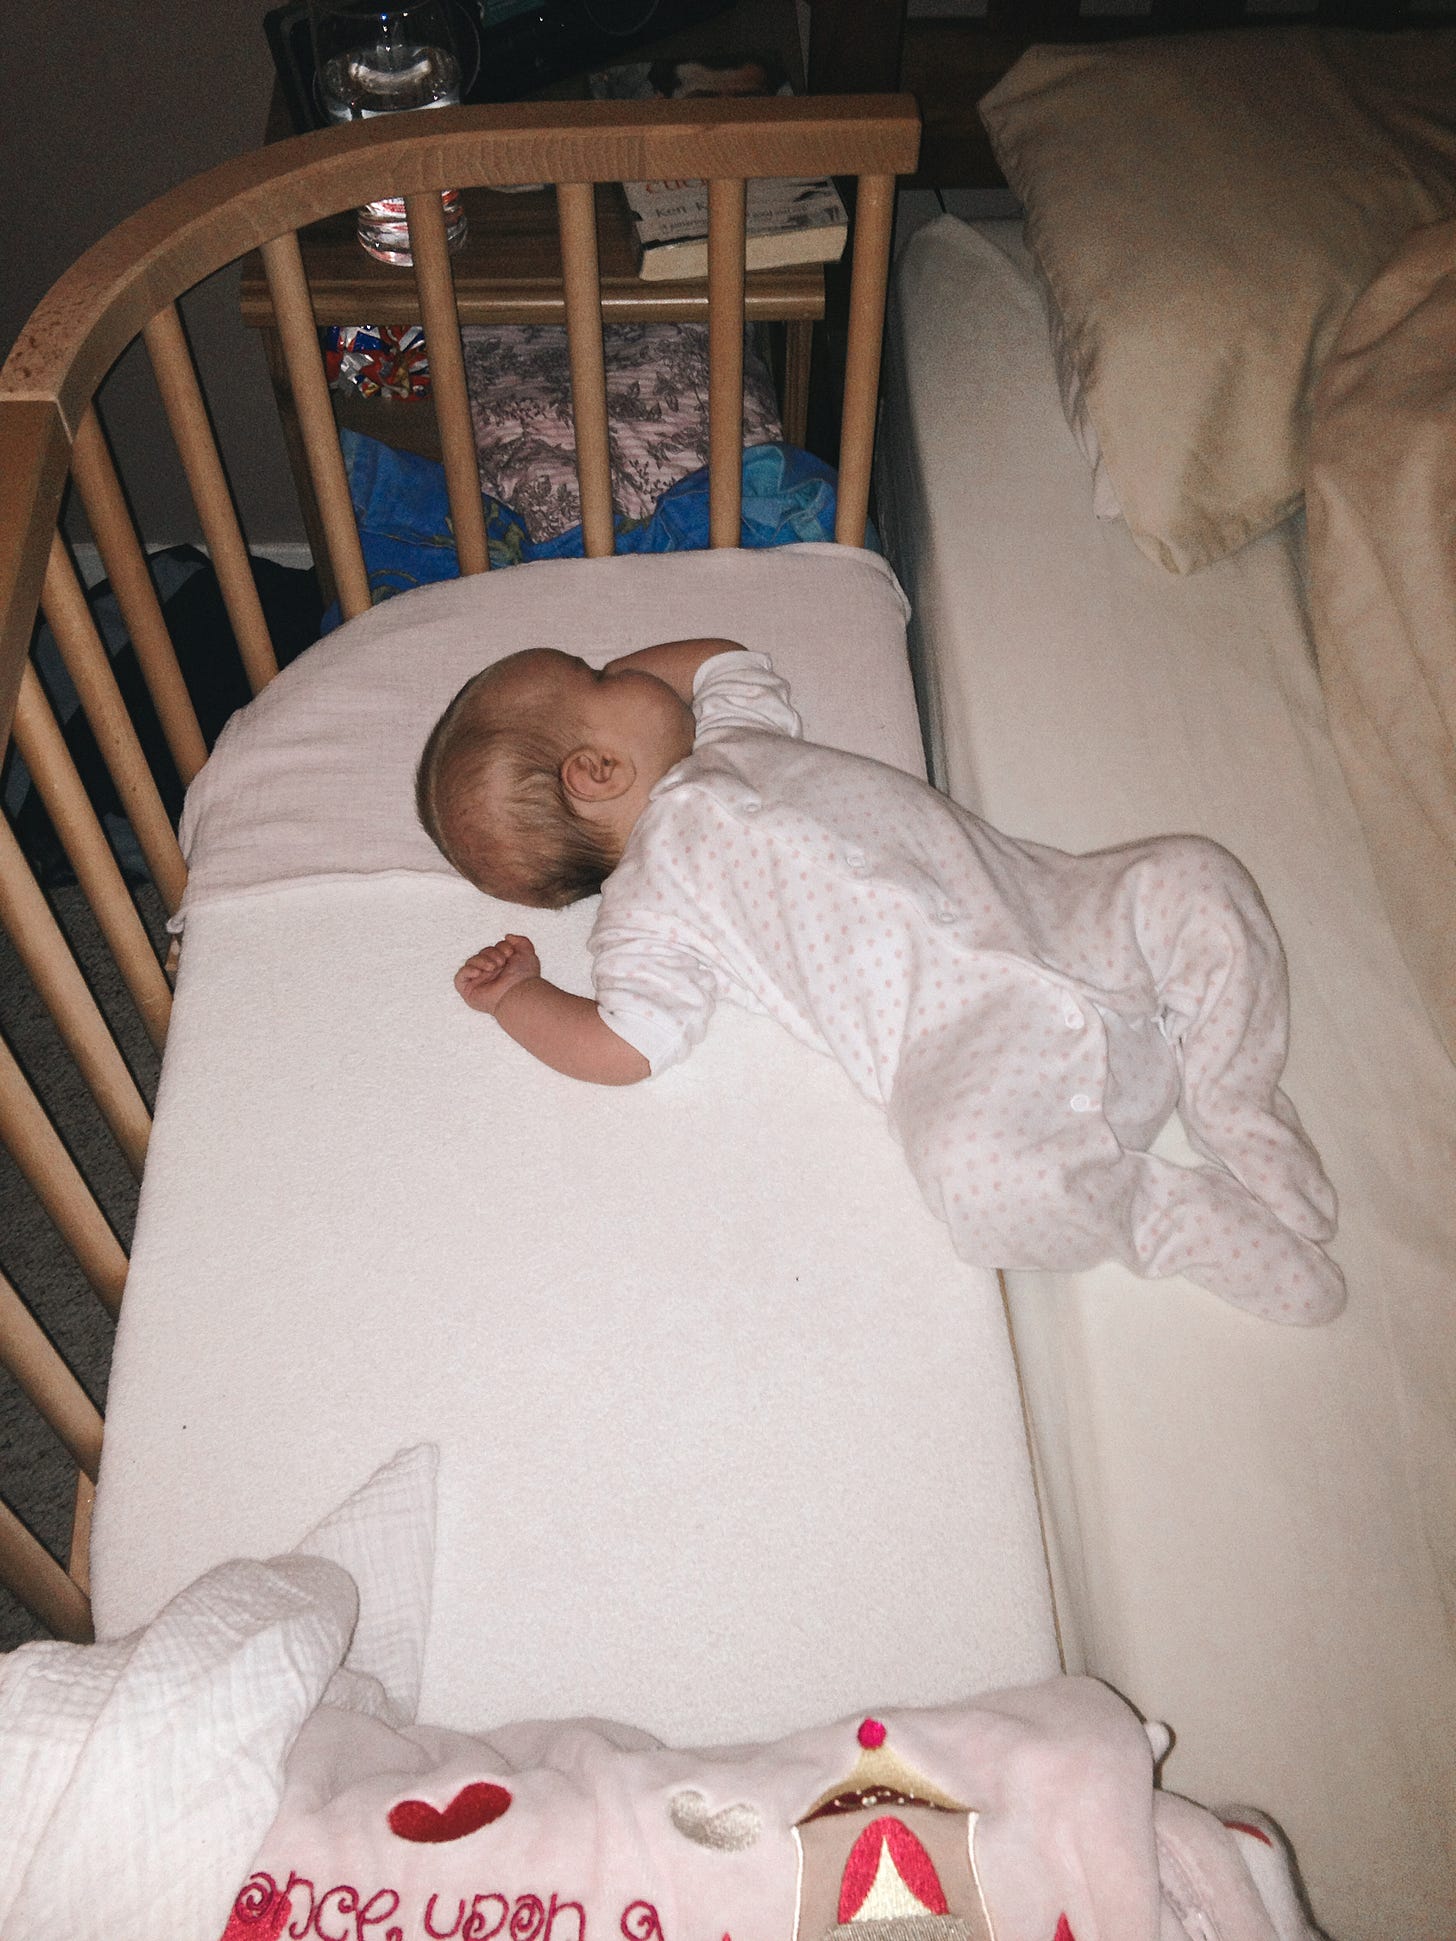 A baby is sleeping mostly on a bedside cot mattress, her feet on the bed